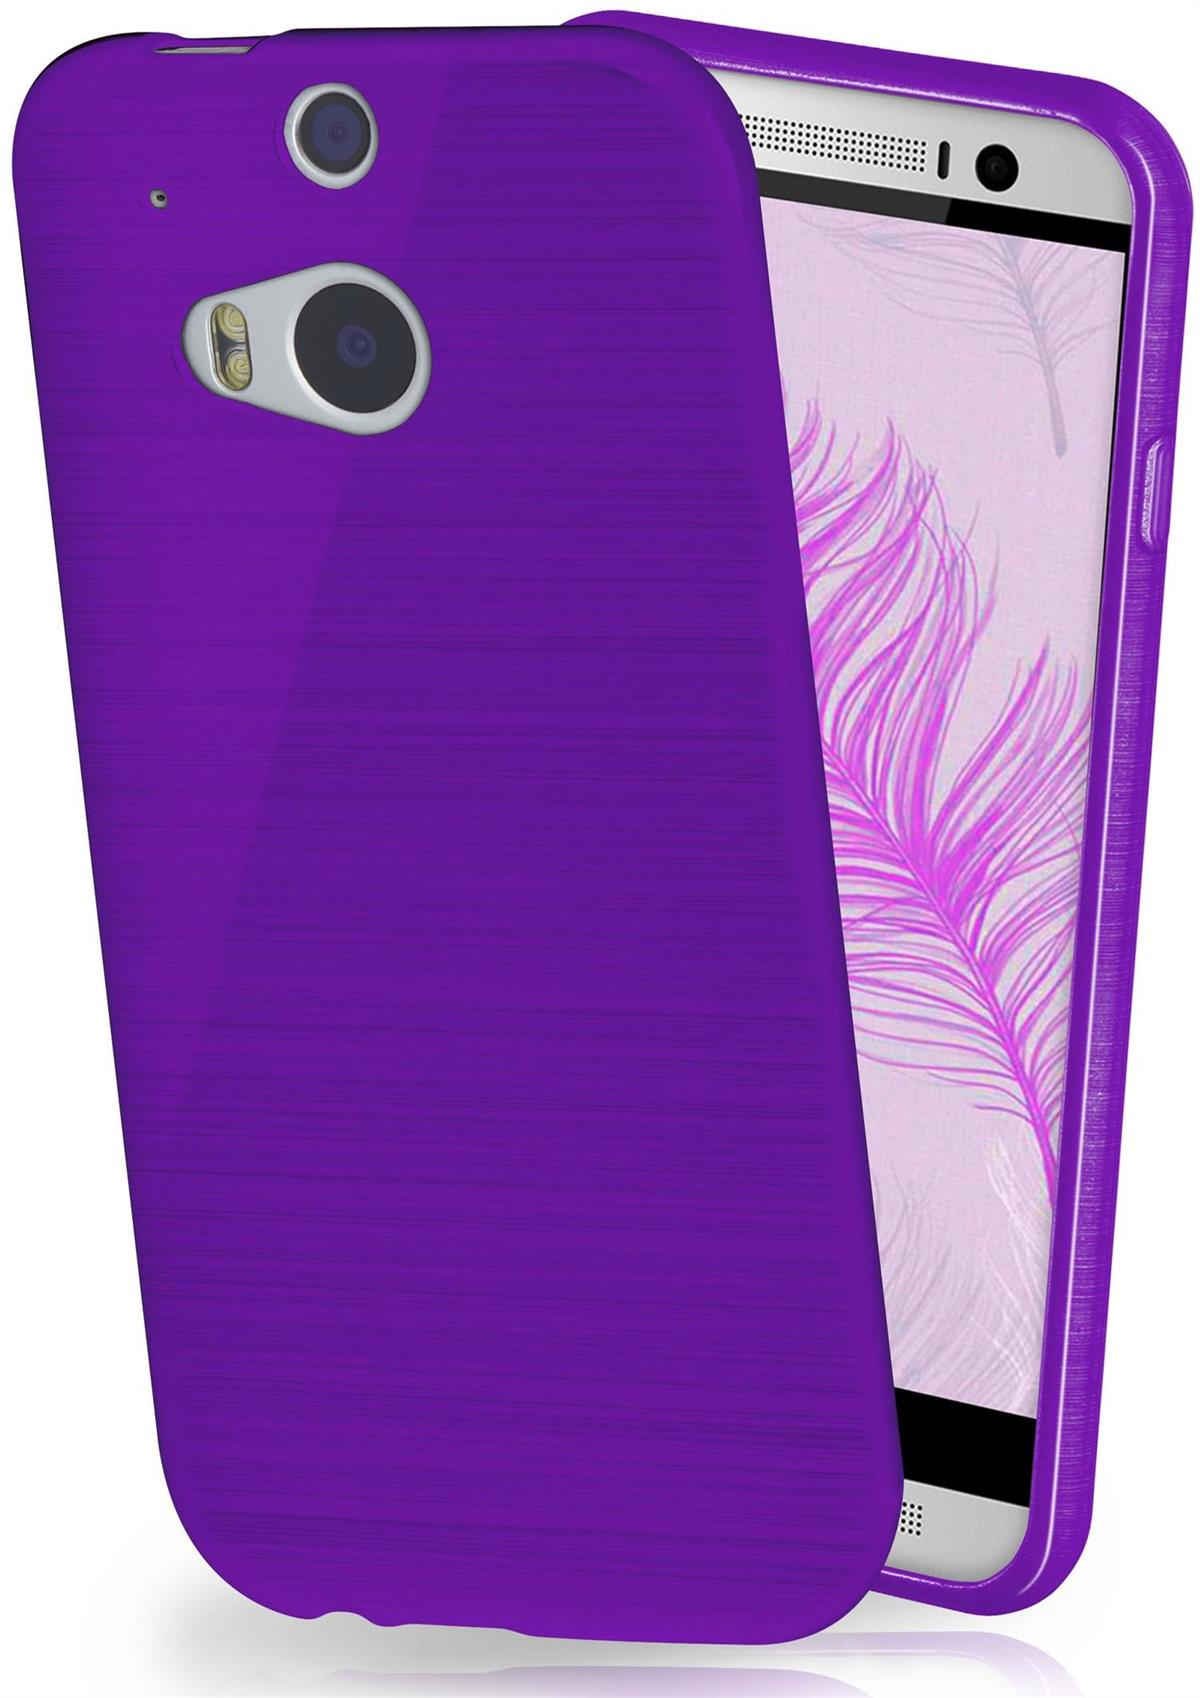 MOEX Brushed Case, Backcover, M8, Purpure-Purple One HTC